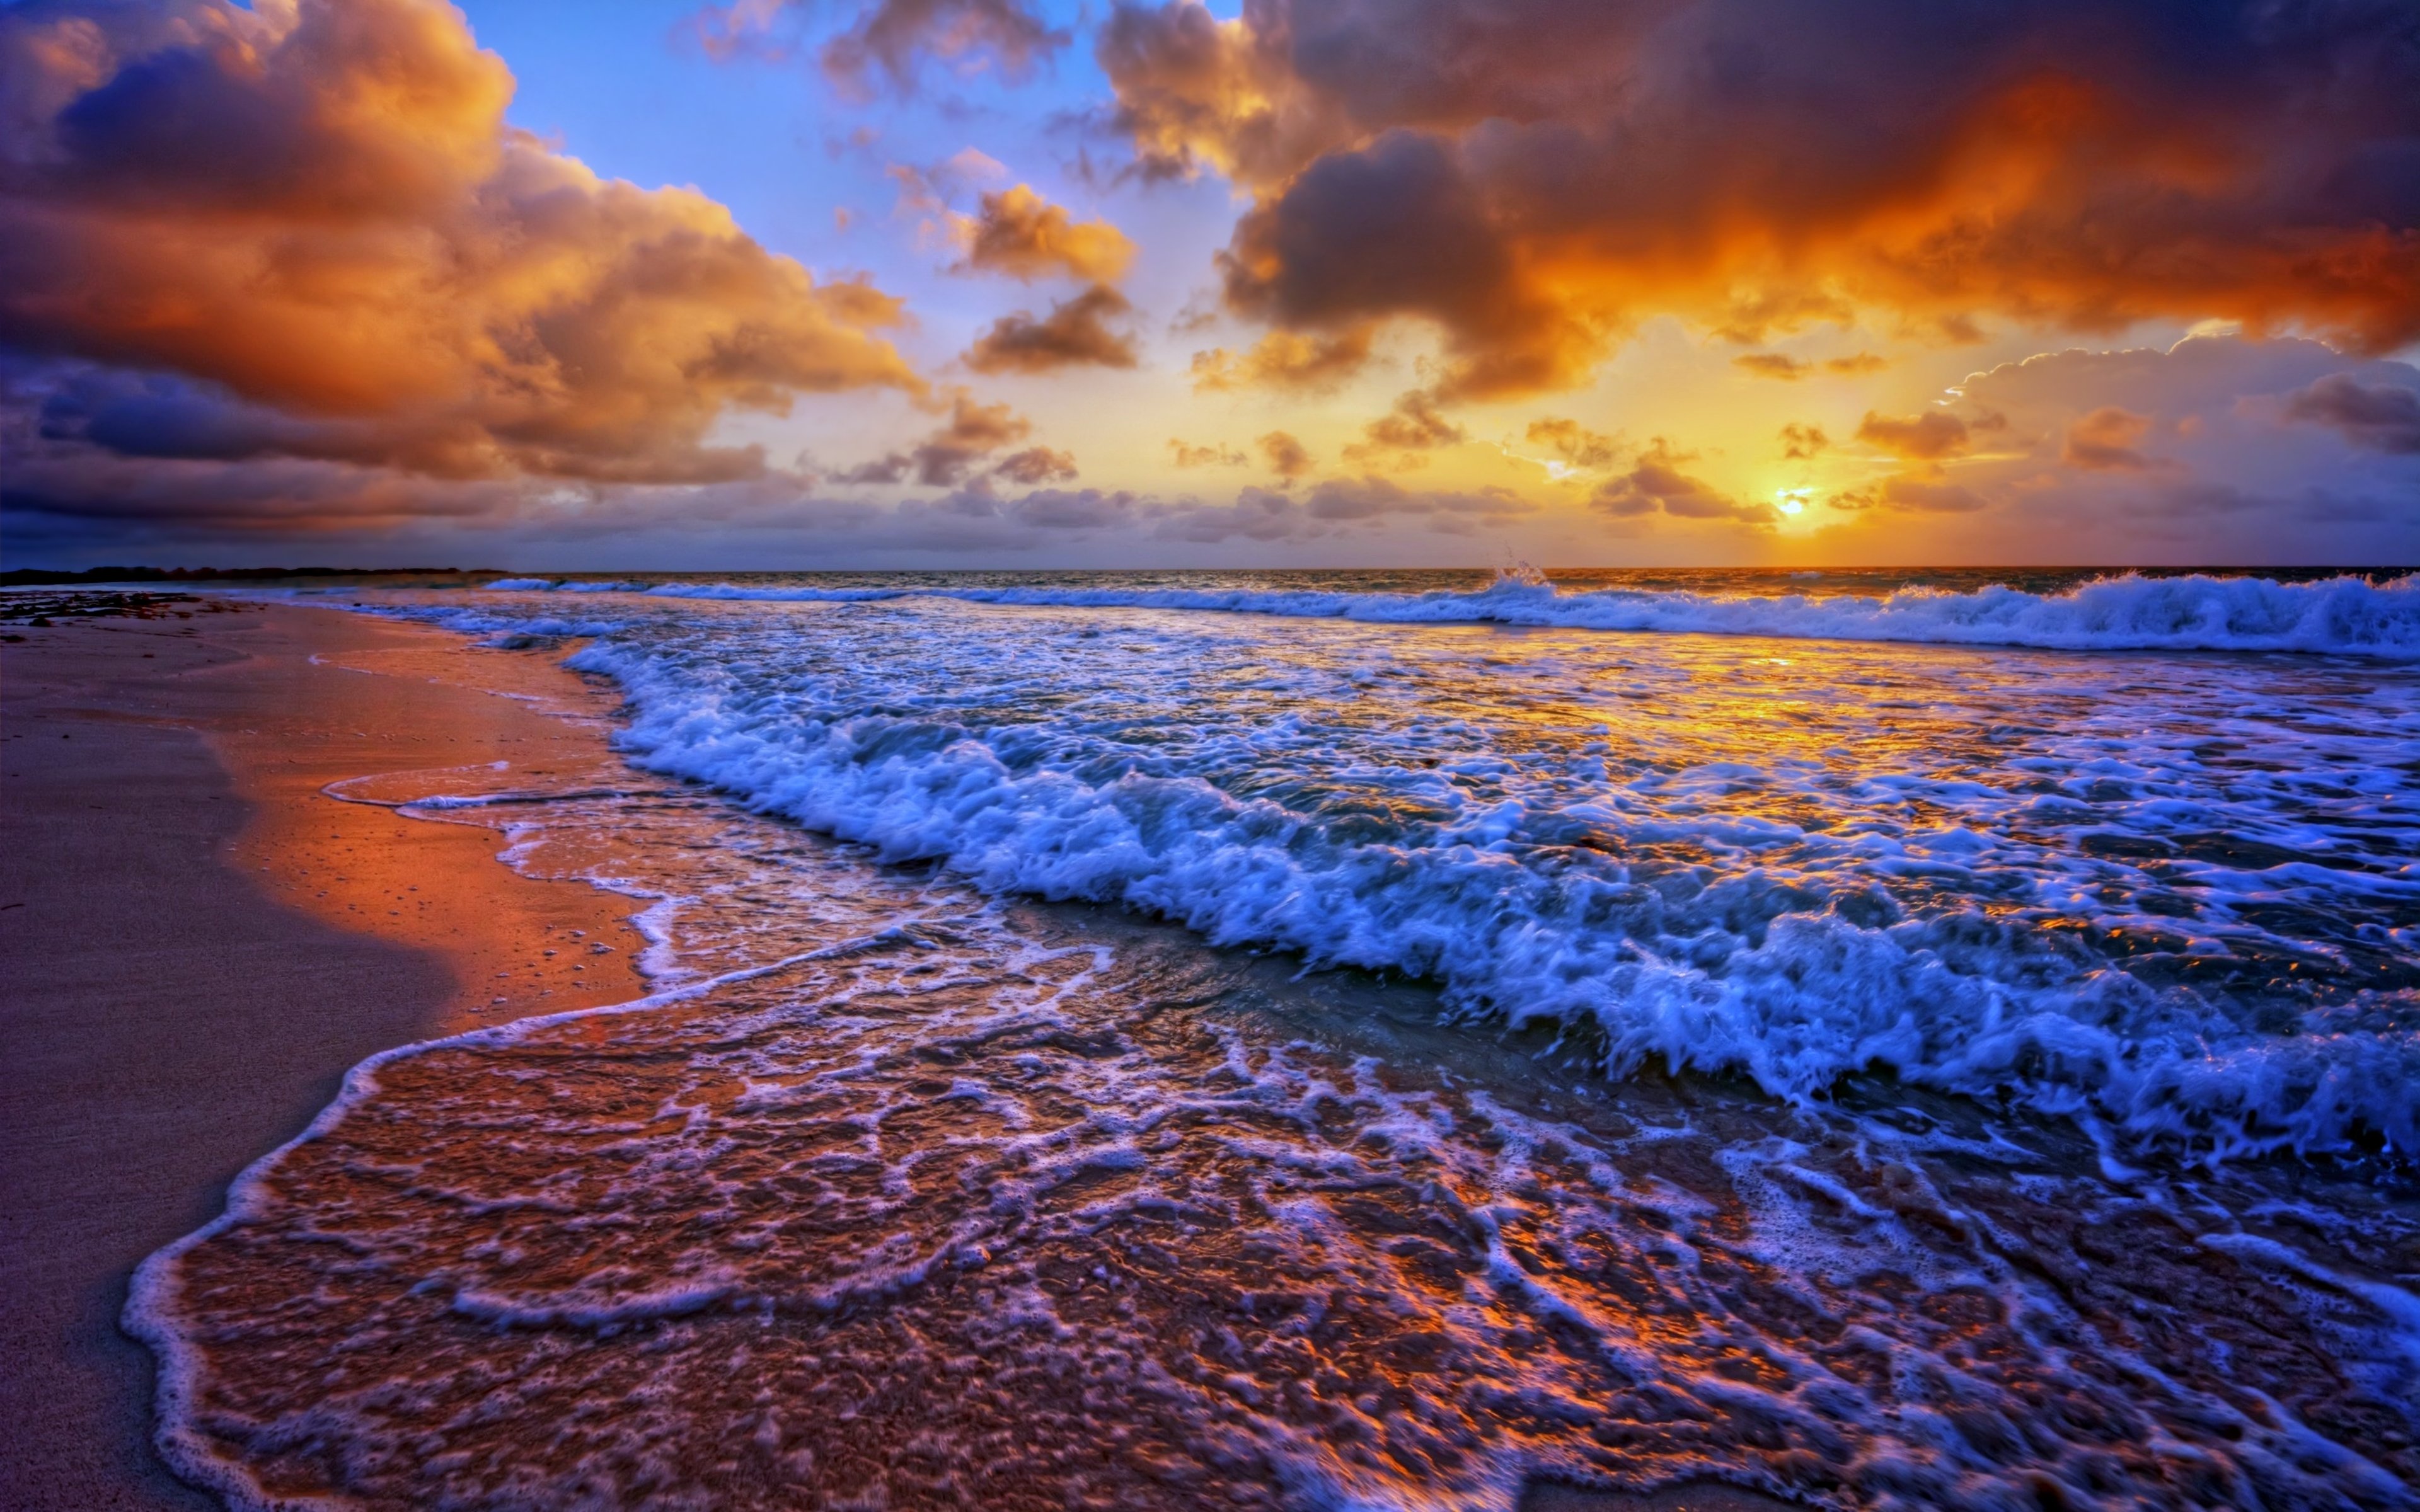 Beaches sea ocean waves sunset sky clouds landscapes nature earth